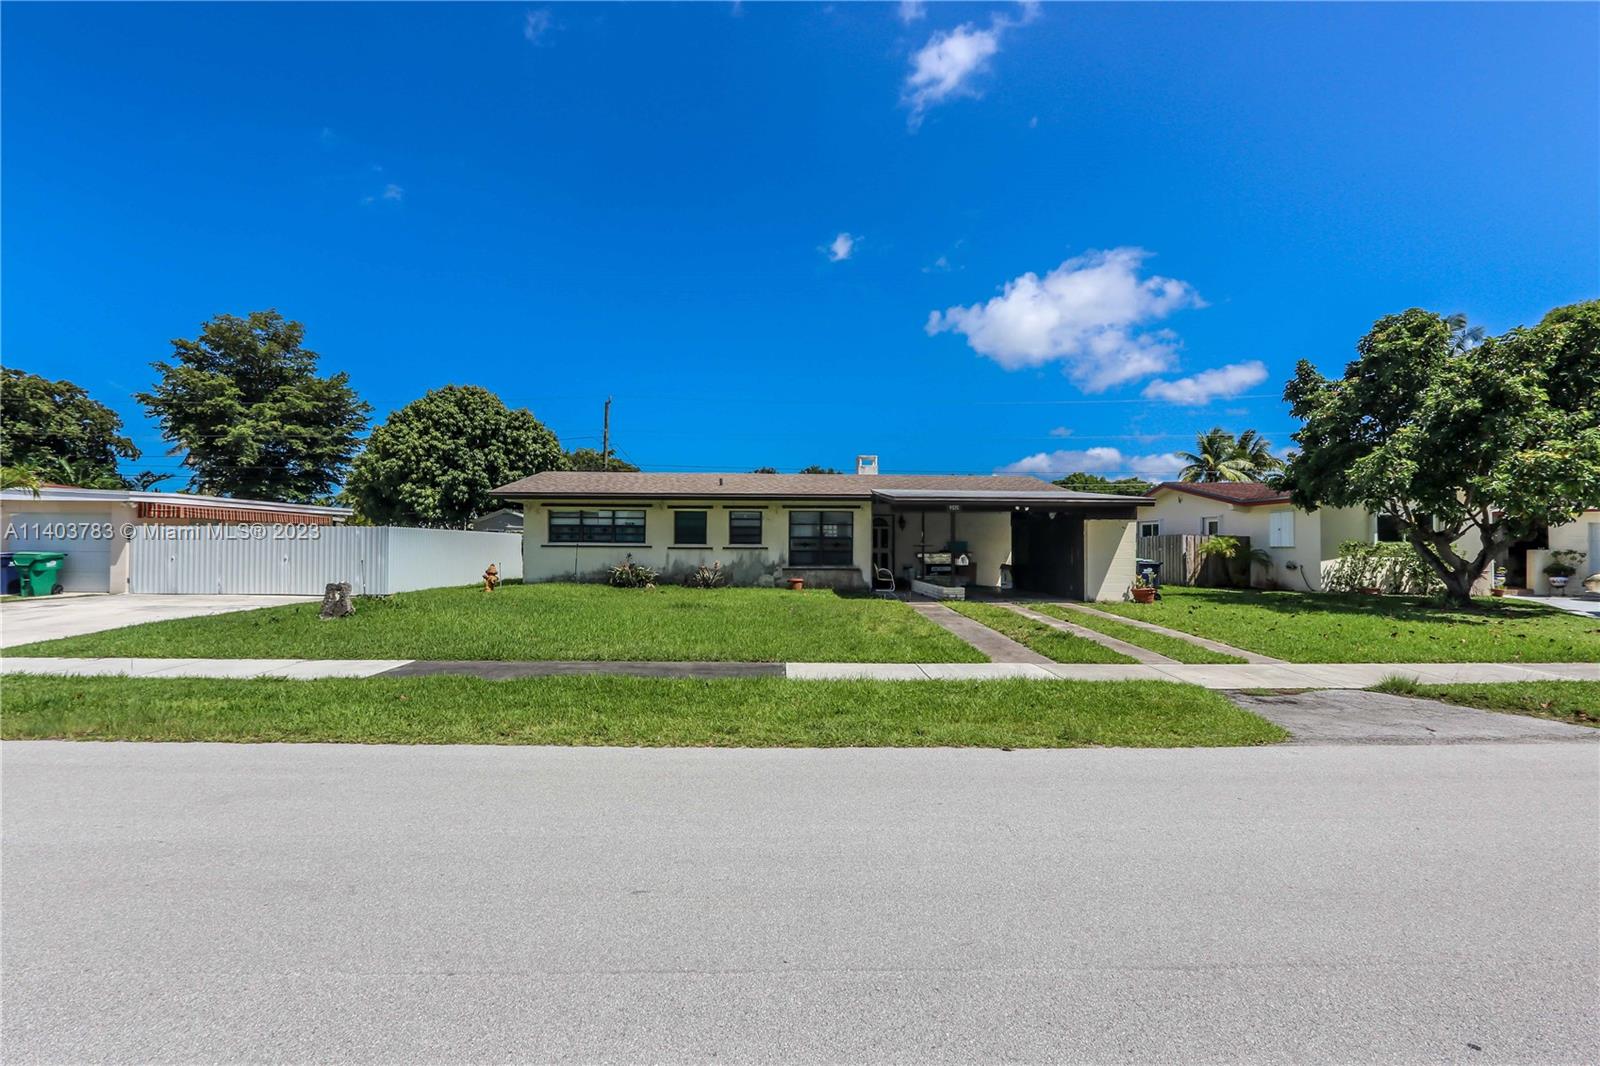 Photo 1 of 9570 Jamaica Dr in Cutler Bay - MLS A11403783